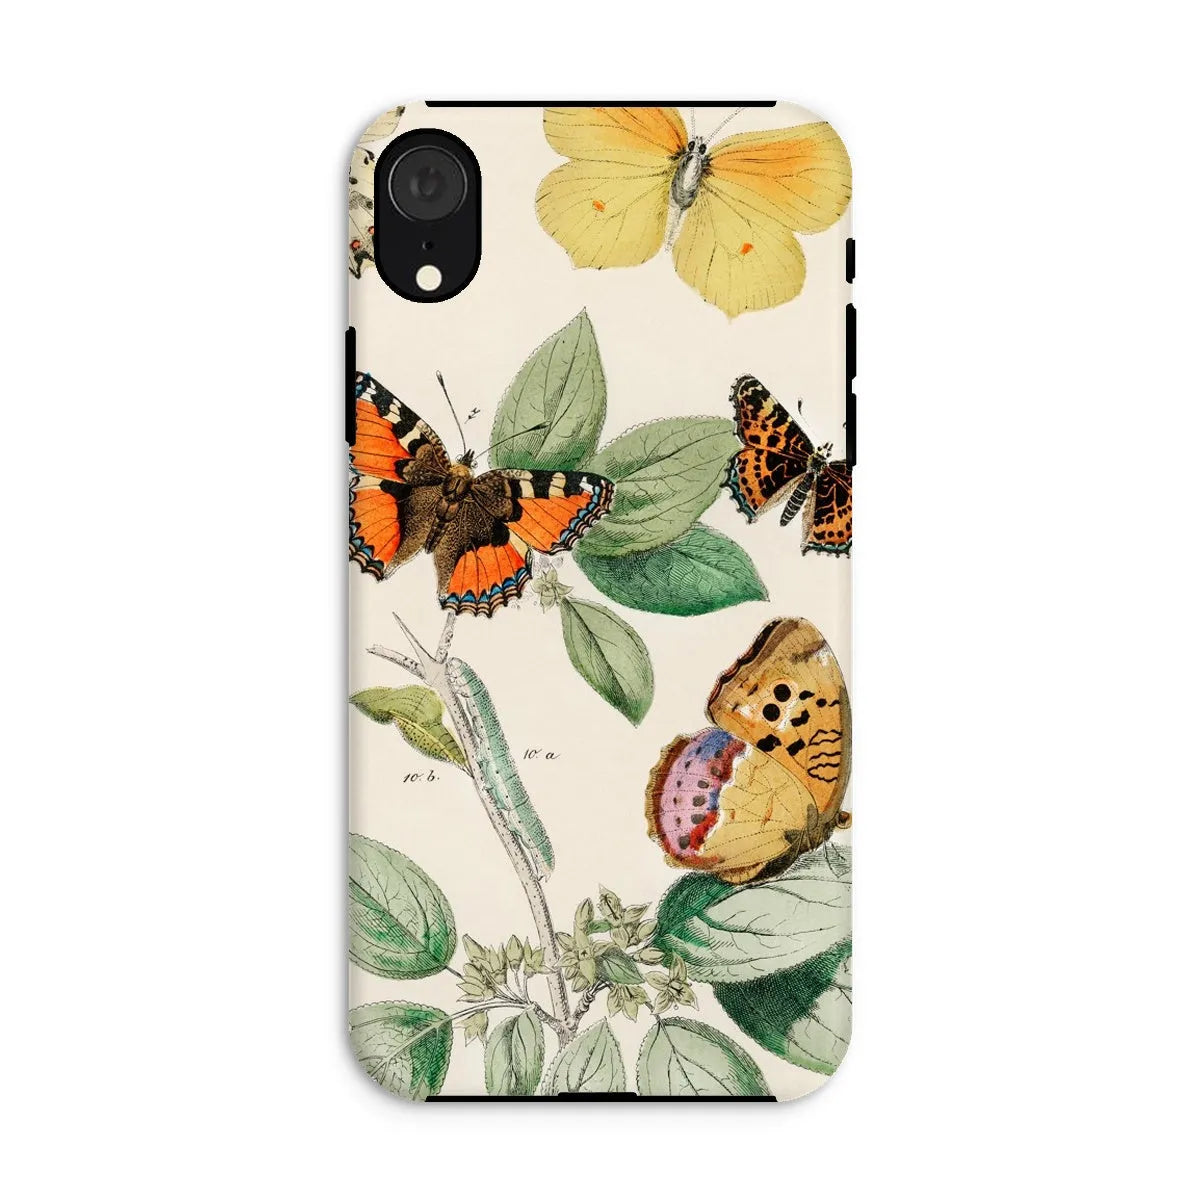 Butterfly Aesthetic Art Phone Case - William Forsell Kirby - Iphone Xr / Matte - Mobile Phone Cases - Aesthetic Art